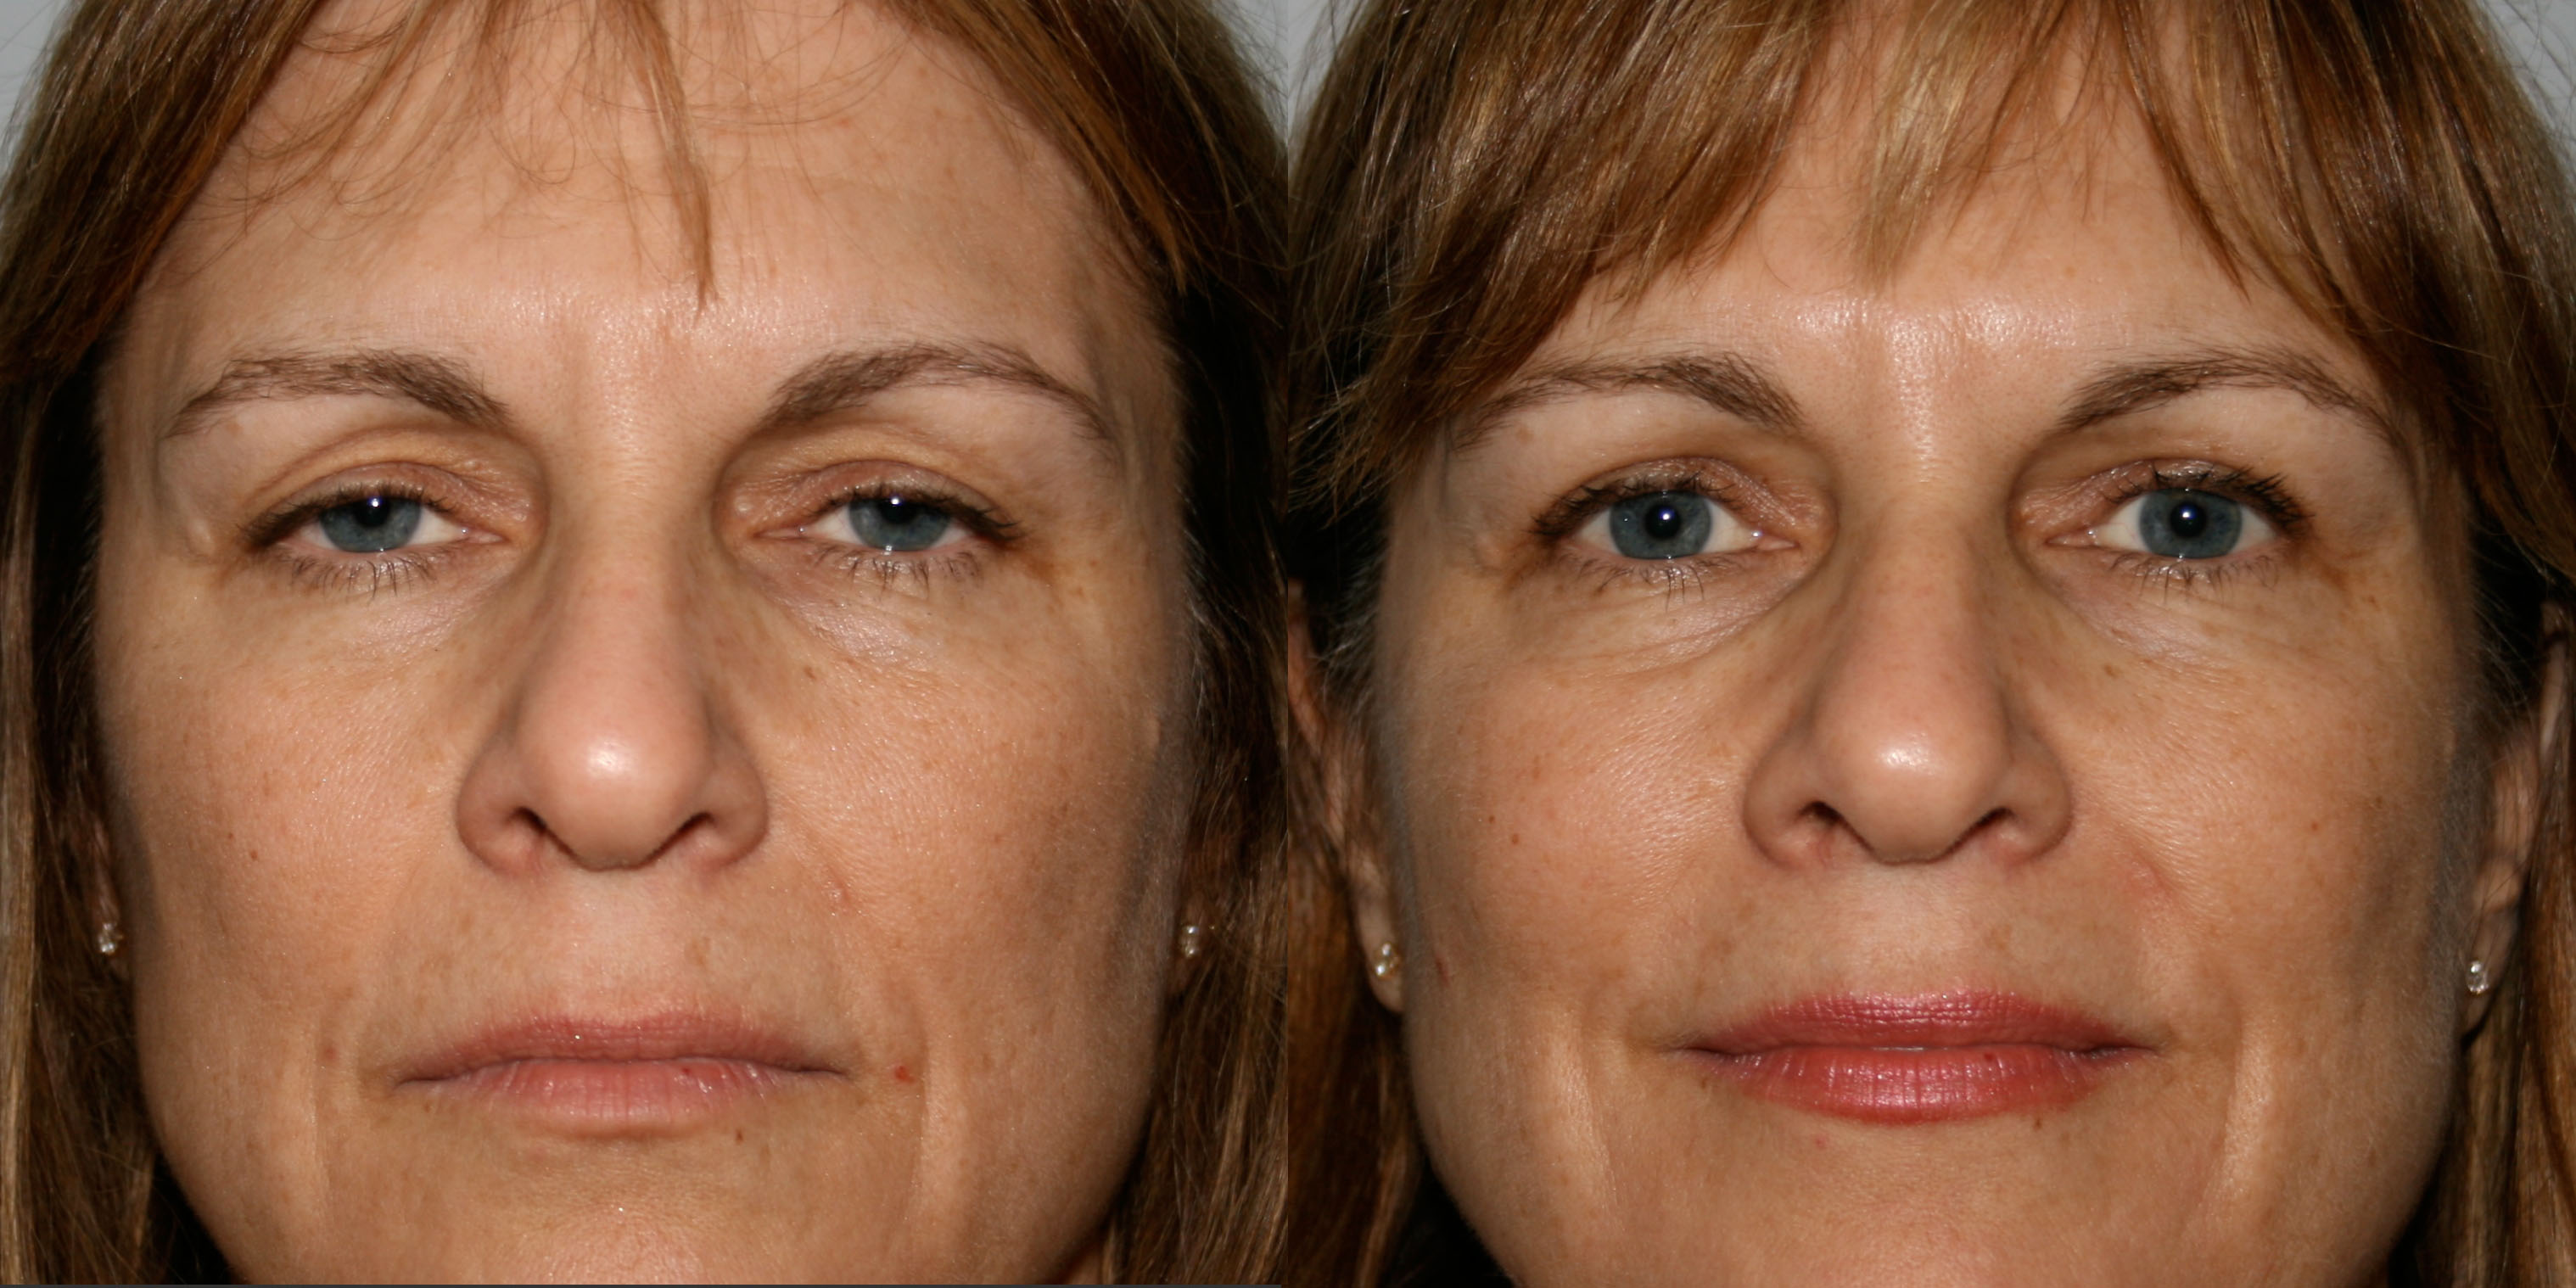 BEFORE AFTER BLEPHAROPLASTY SURGERY before after